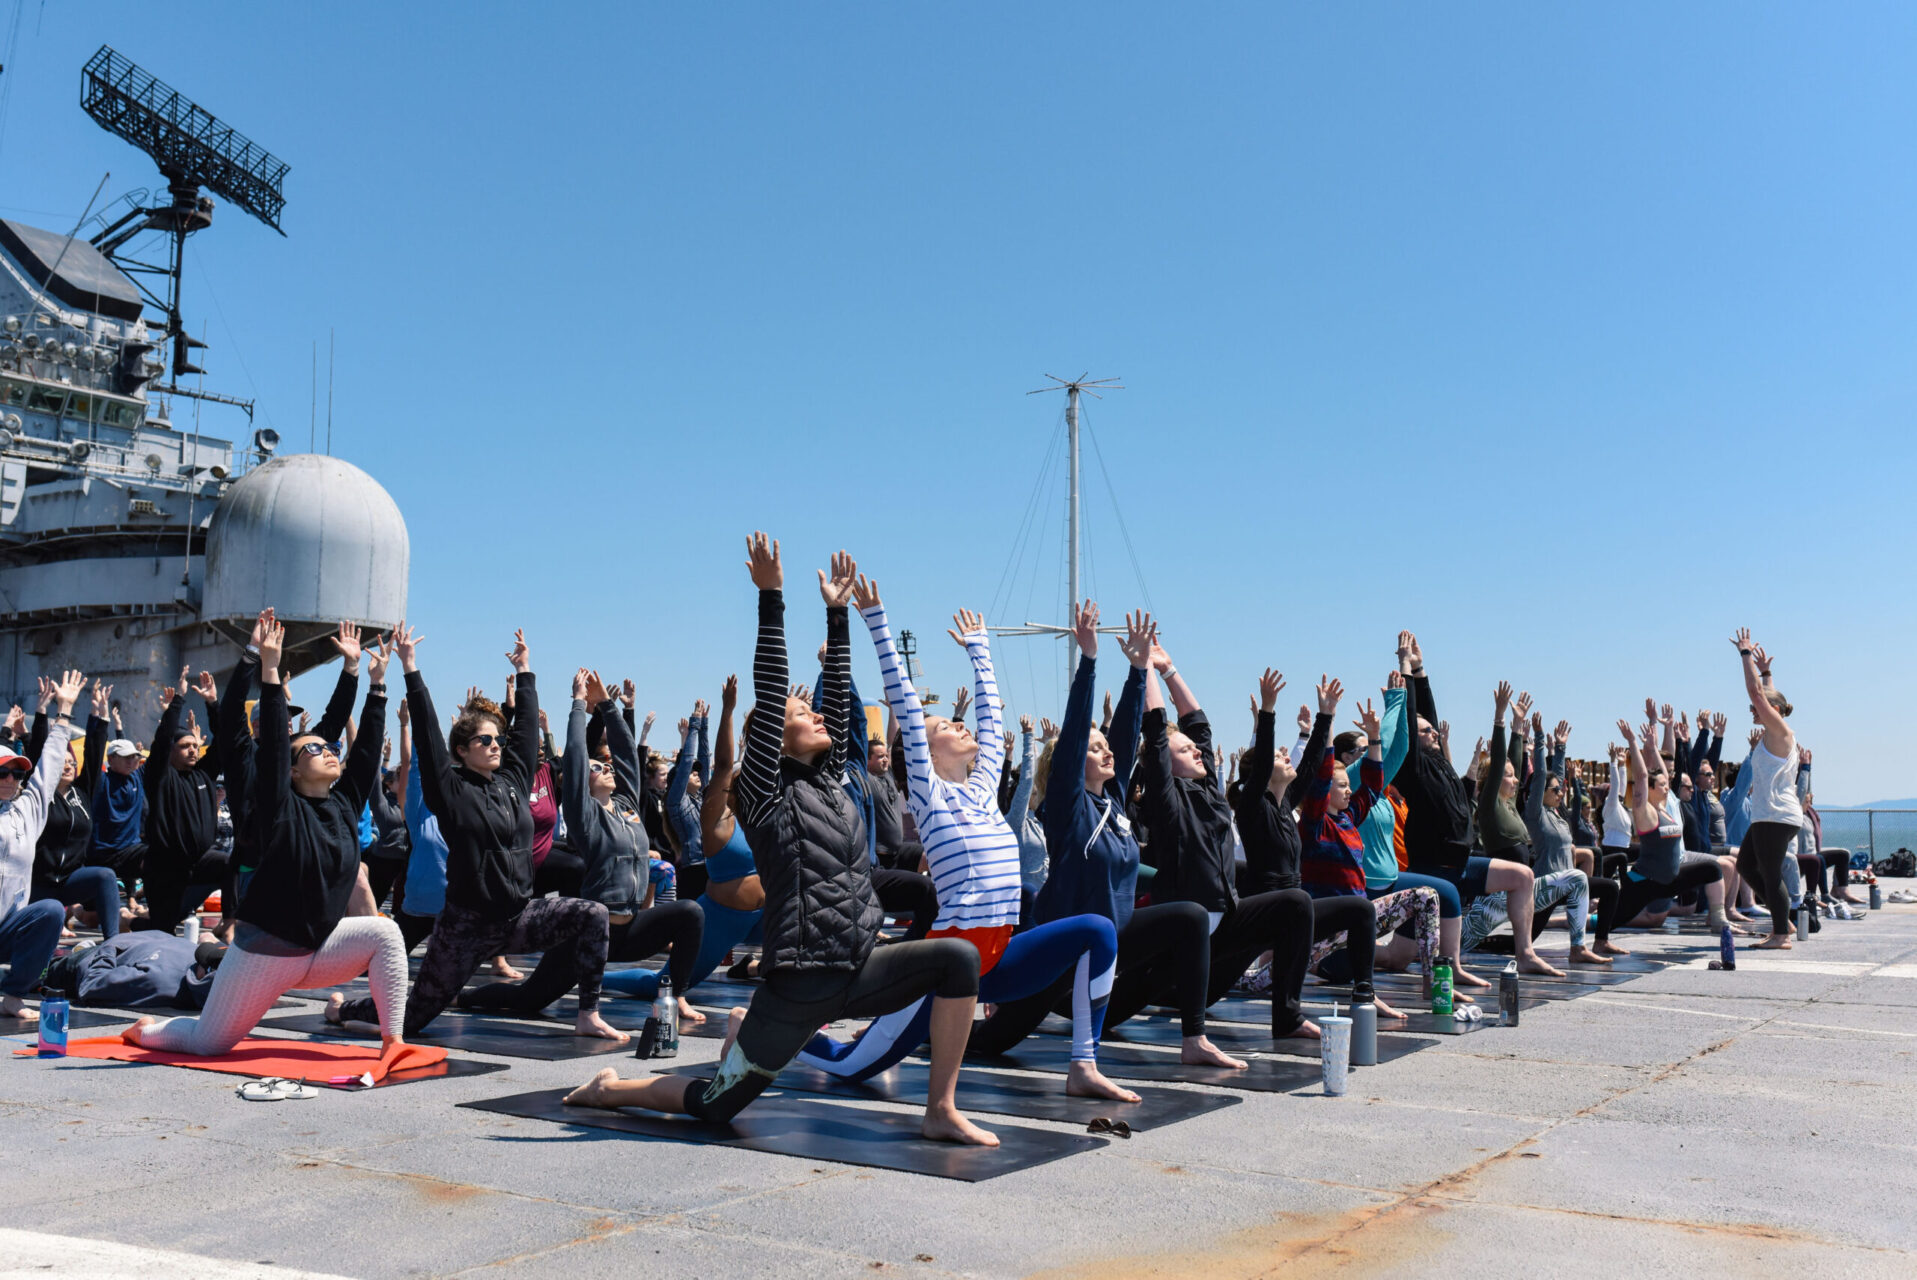 Veterans yoga project - yoga on aircraft carrier